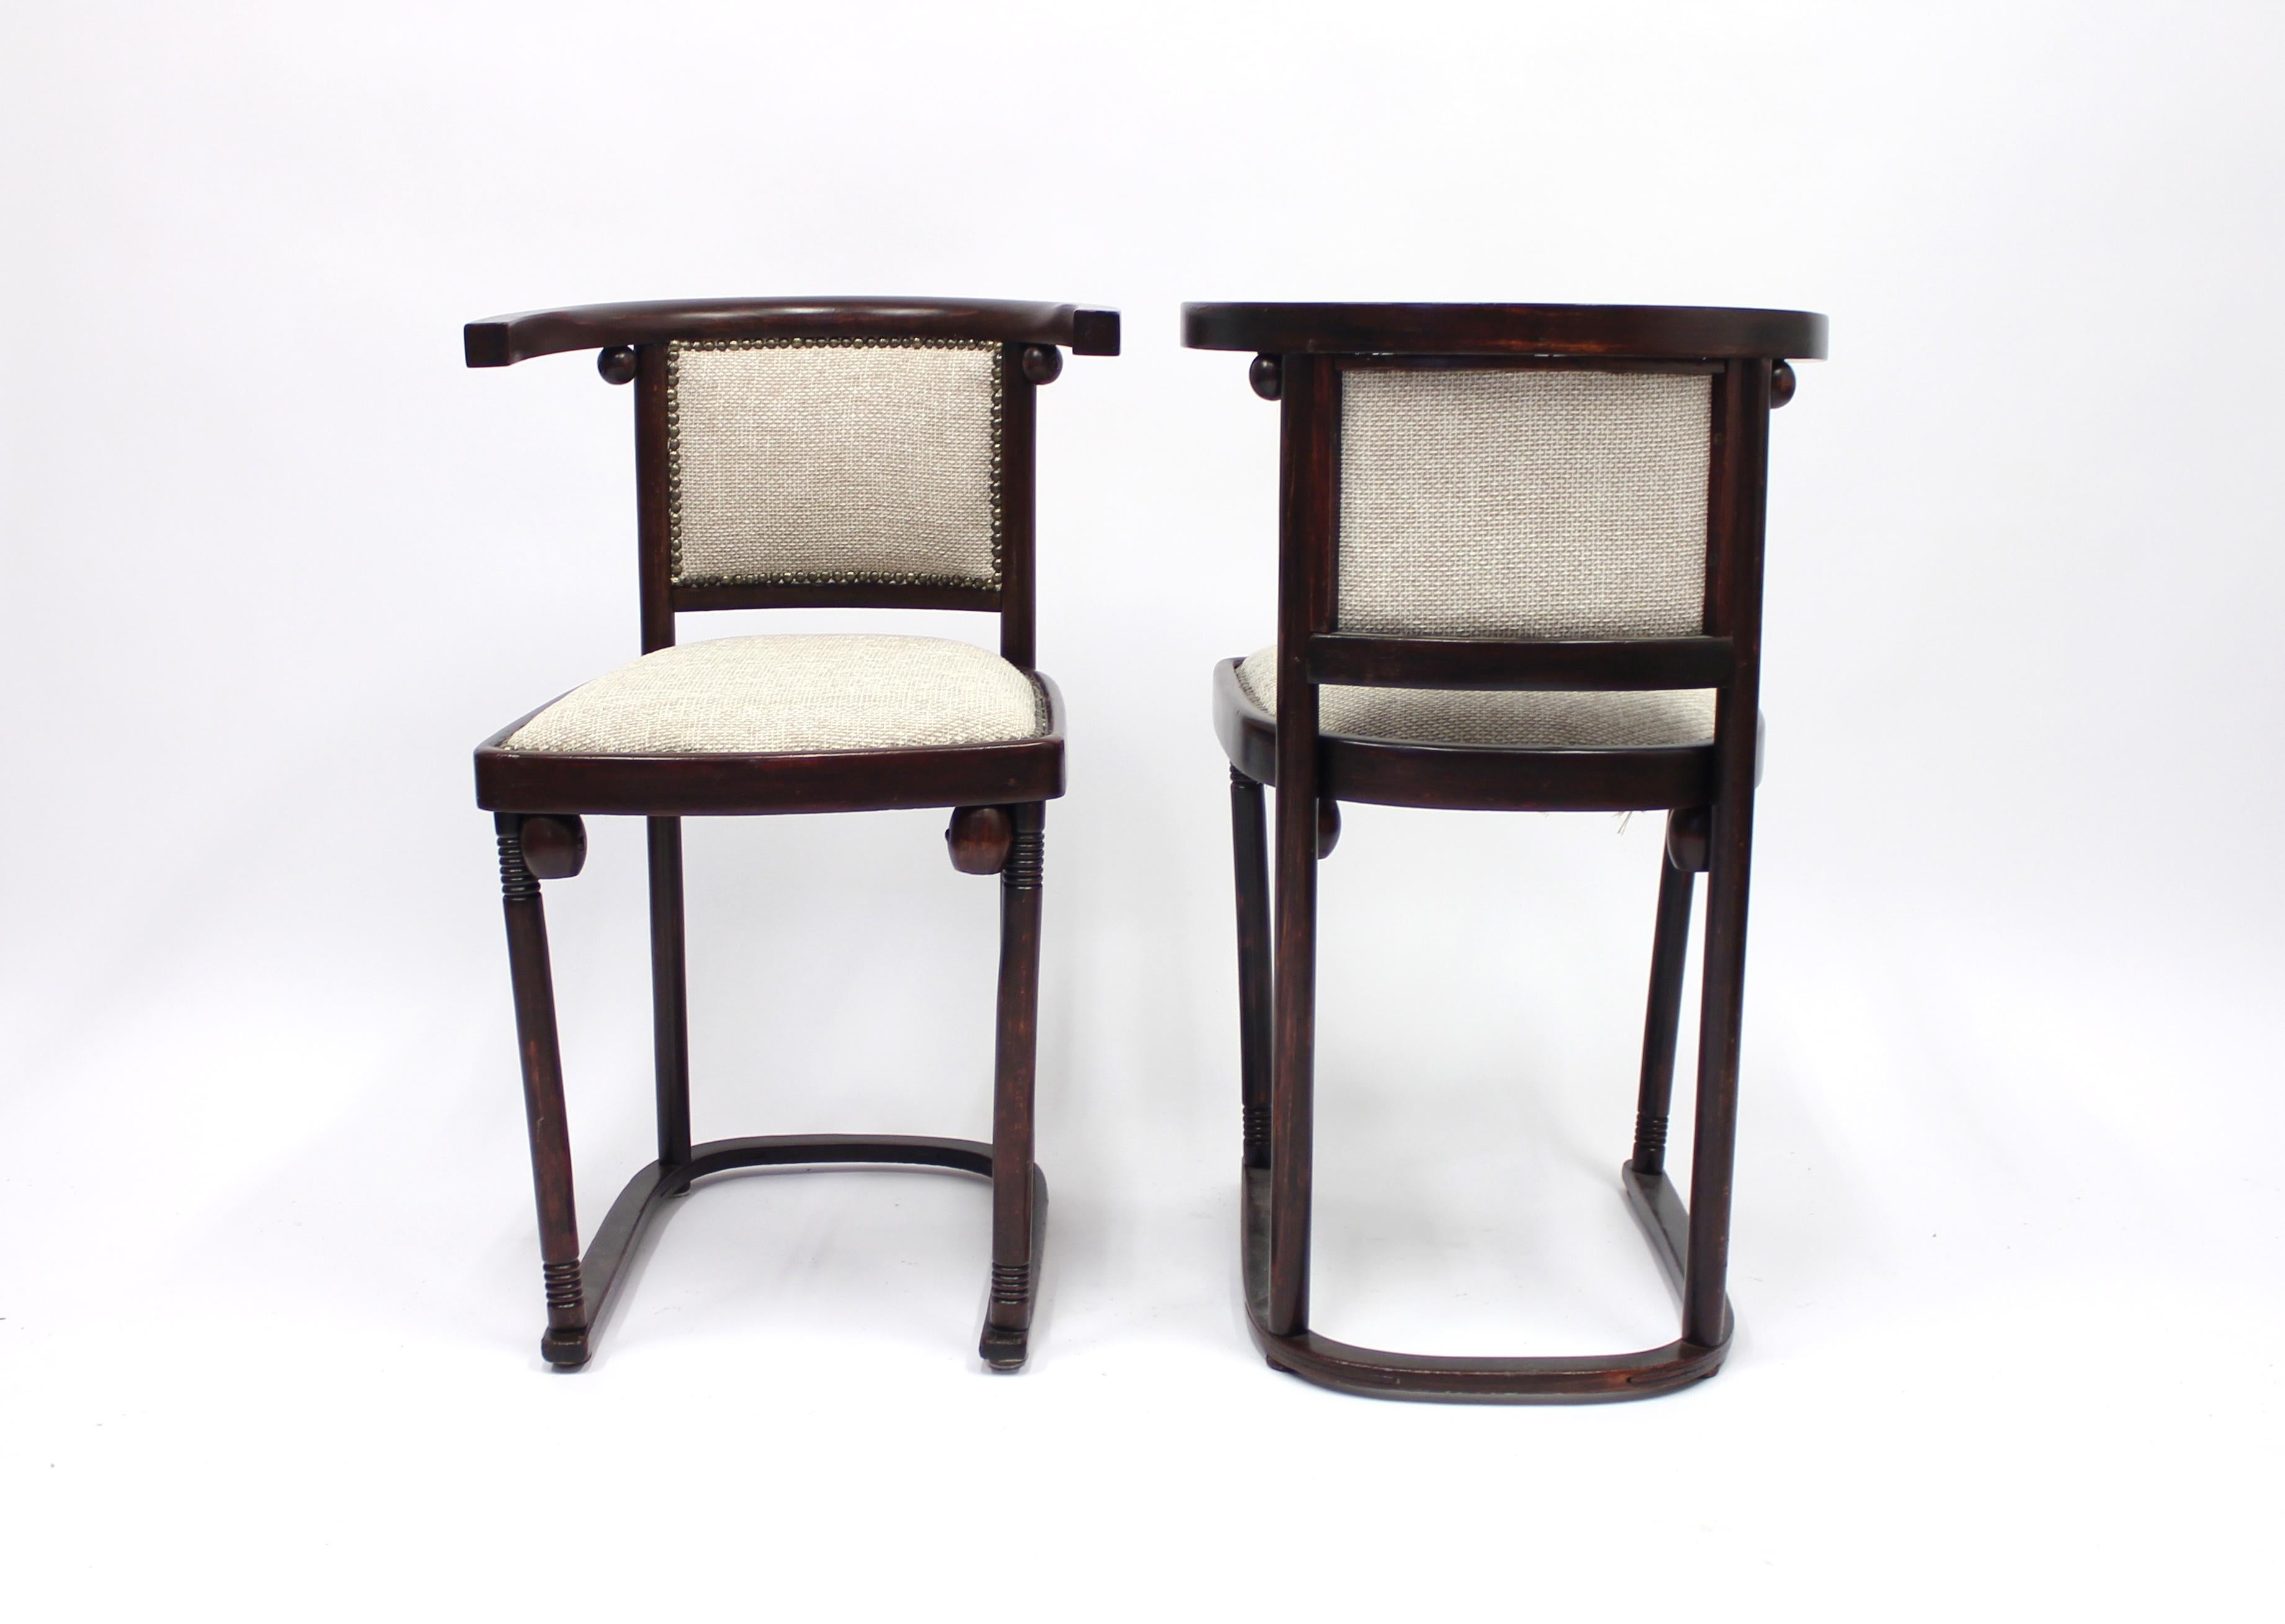 Vienna Secession Cabaret Fledermaus Chairs by Josef Hoffmann for Thonet, Set of Two